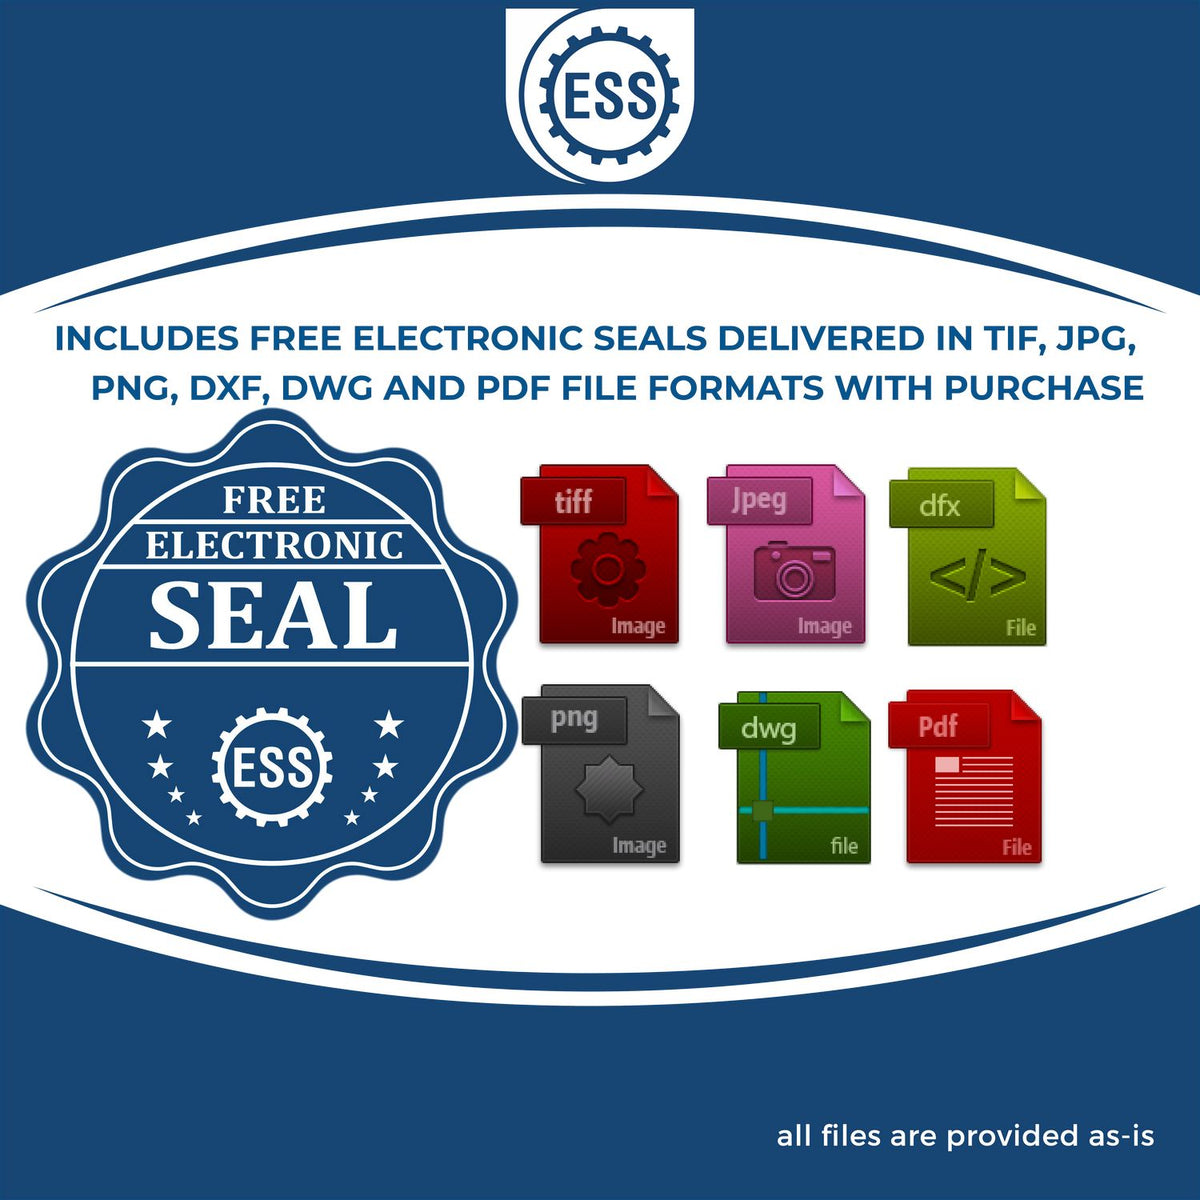 An infographic for the free electronic seal for the Premium MaxLight Pre-Inked Kentucky Geology Stamp illustrating the different file type icons such as DXF, DWG, TIF, JPG and PNG.